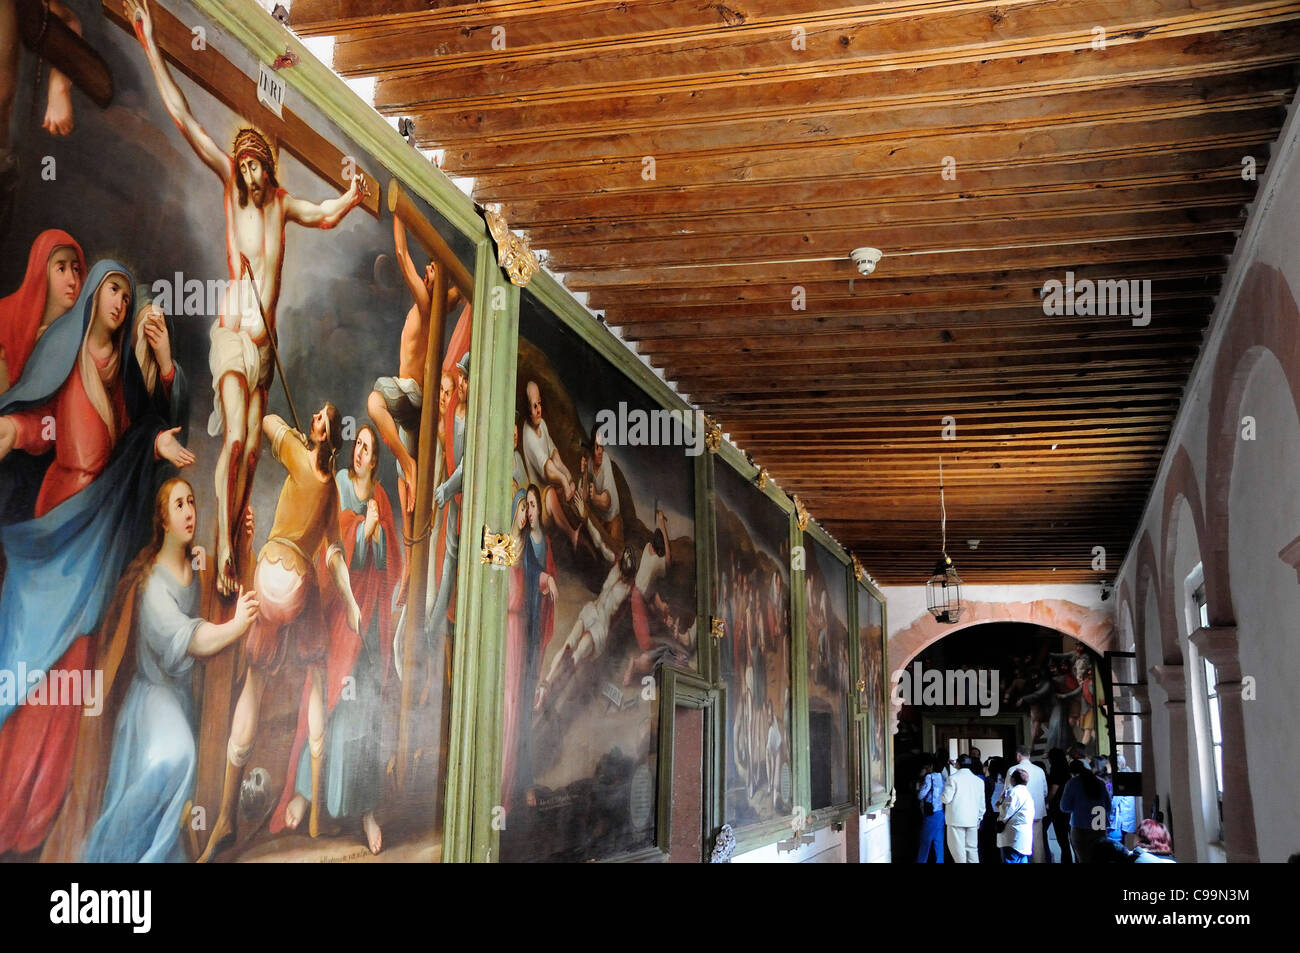 Mexico, Bajio, Zacatecas, Paintings of the Stations of the Cross in the Monastery Museum of Guadalupe. Stock Photo